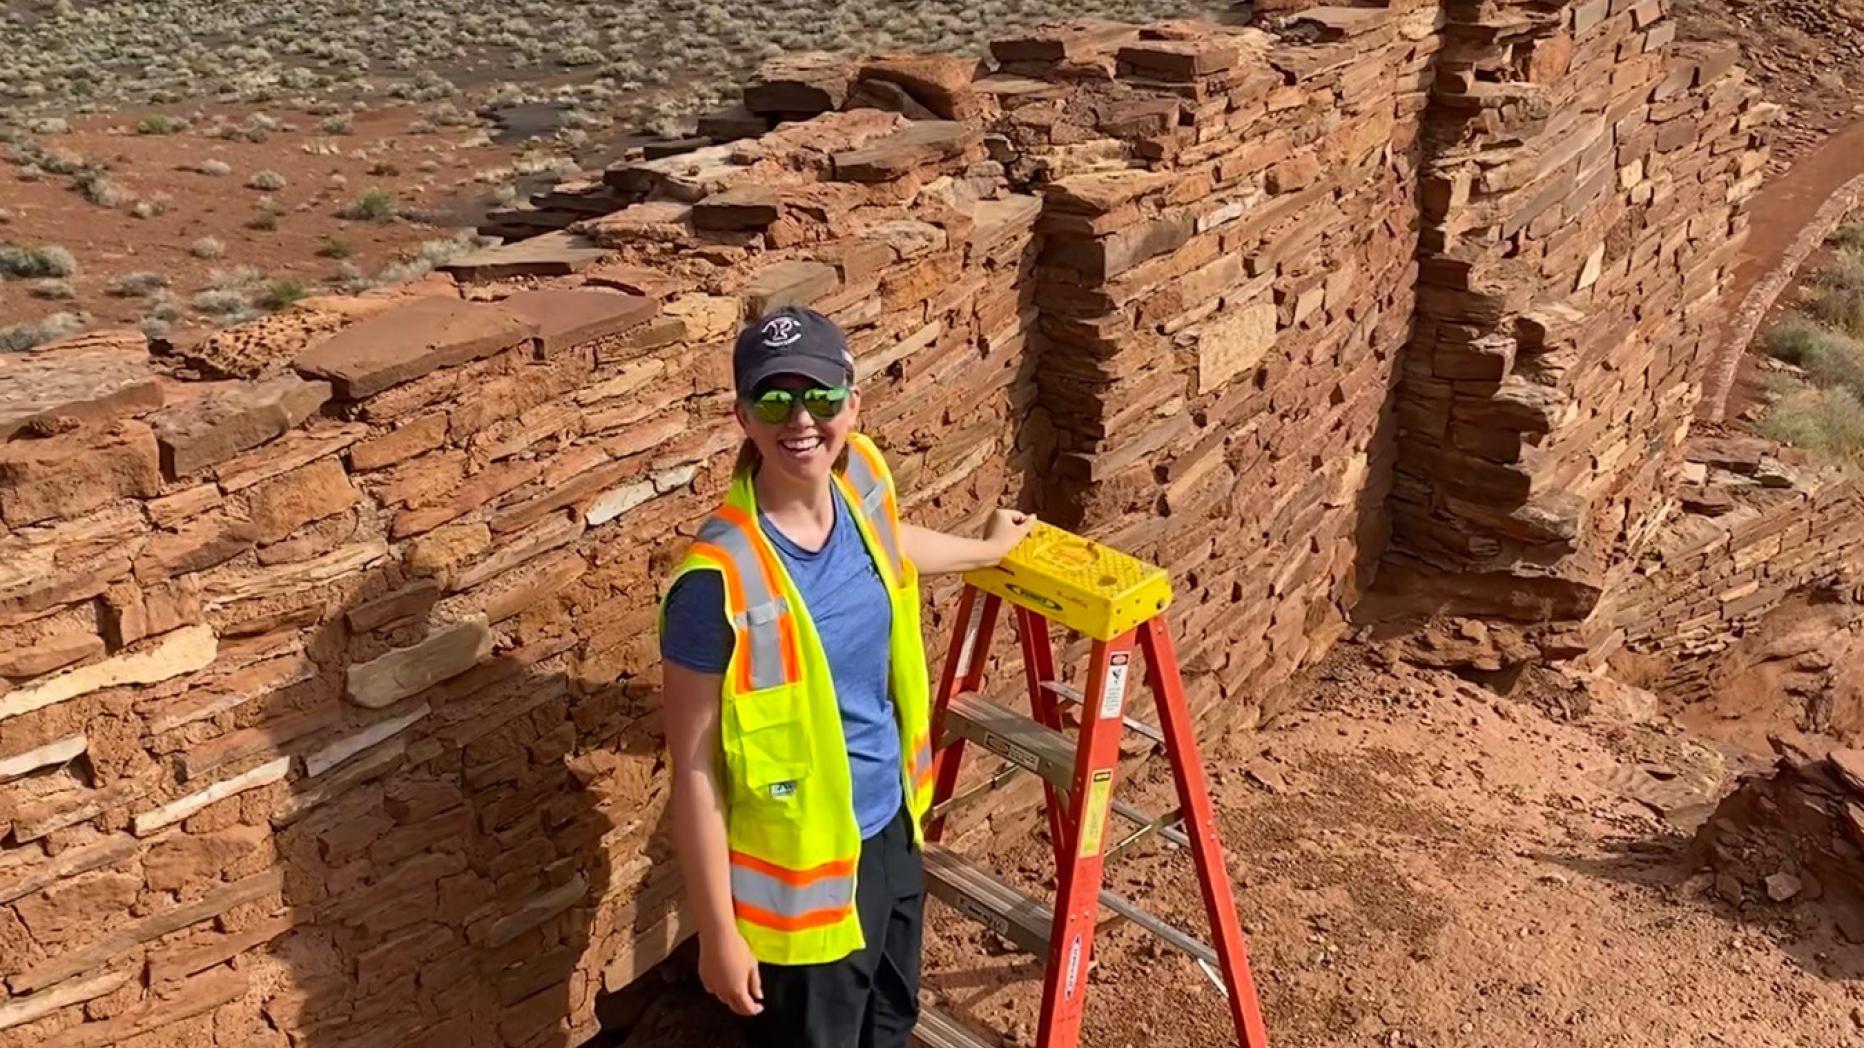 Cameron at the top of the South Unit of Wupatki Pueblo.